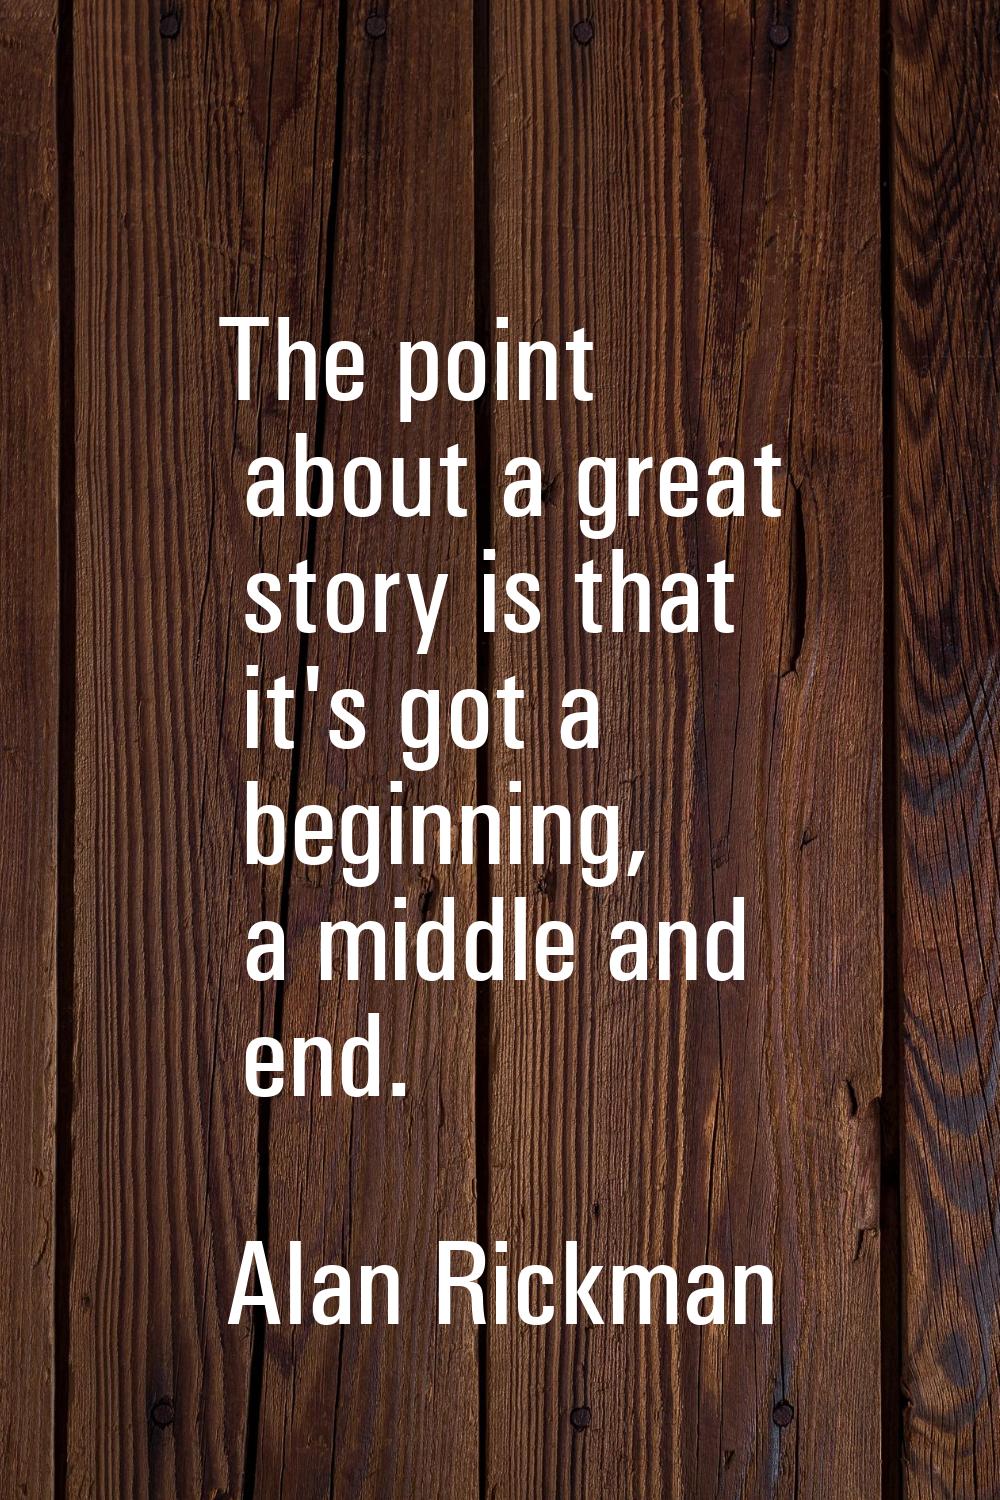 The point about a great story is that it's got a beginning, a middle and end.